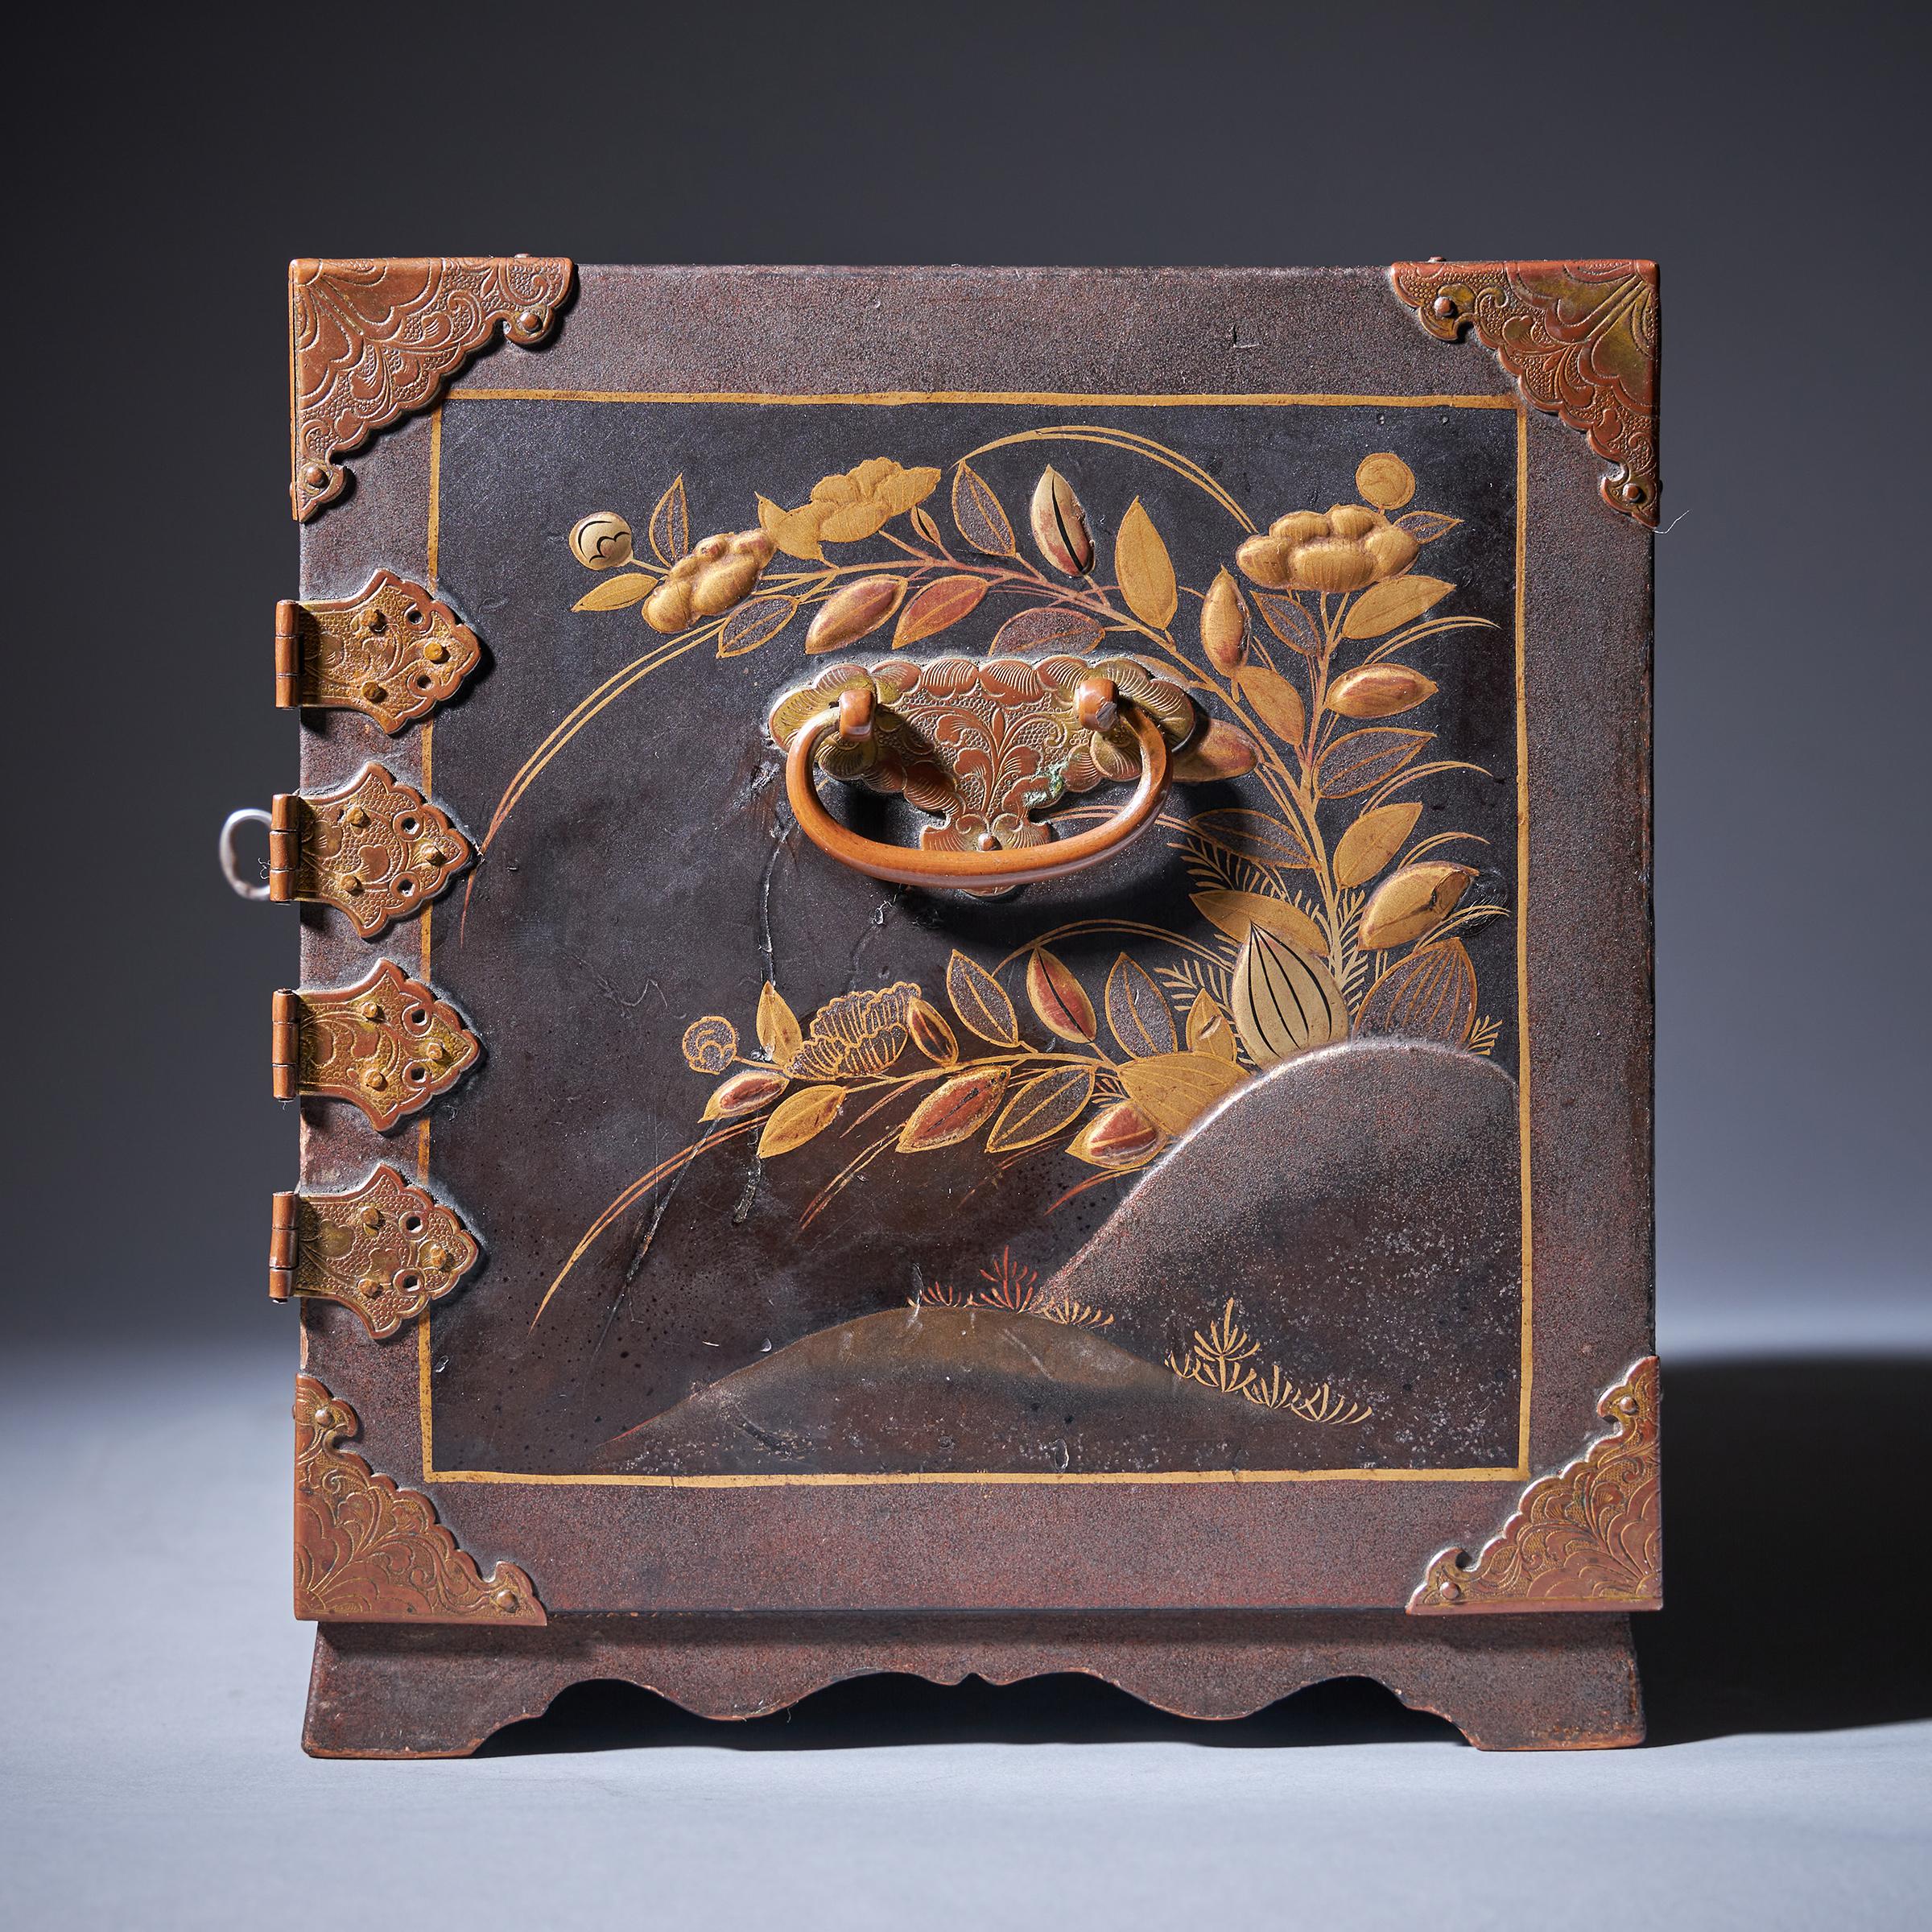 Important Early Edo Period 17th Century Miniature Japanese Lacquer Cabinet For Sale 8